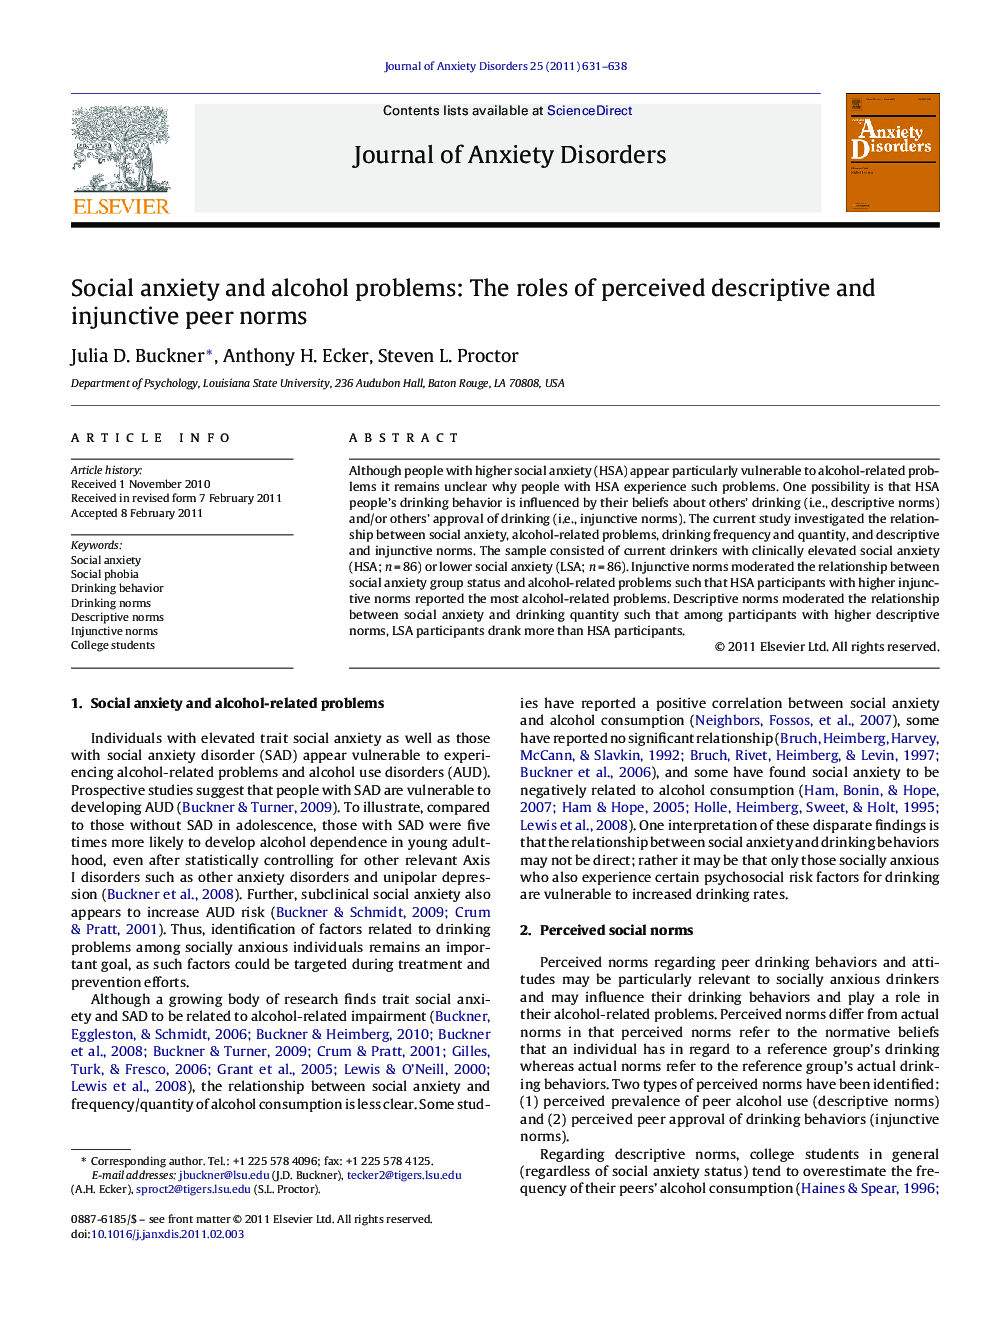 Social anxiety and alcohol problems: The roles of perceived descriptive and injunctive peer norms